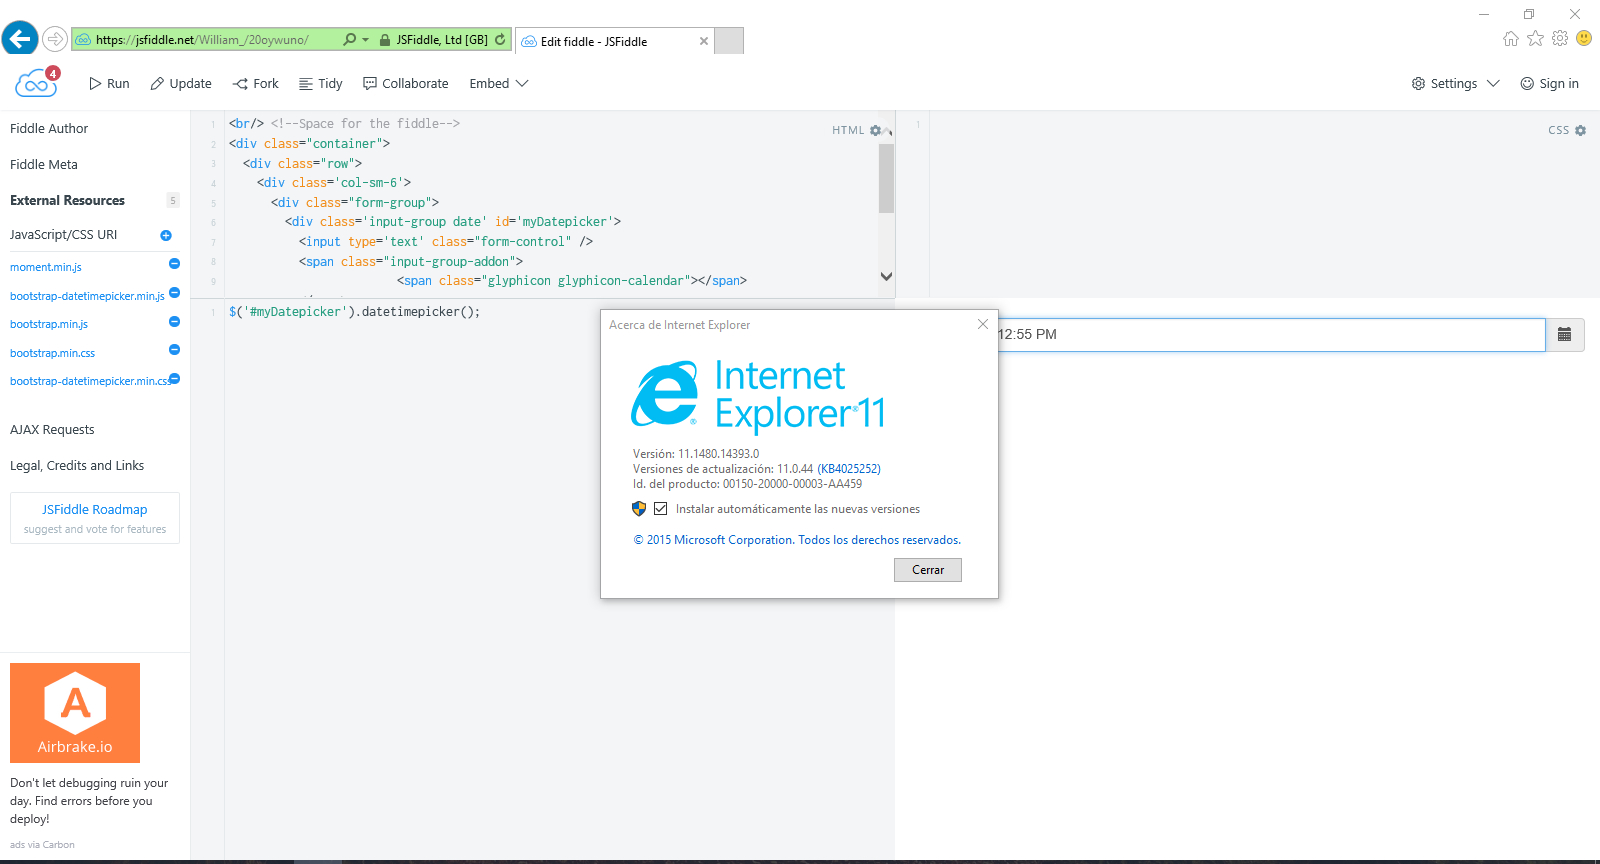 Date Time Picker Not Working In Ie 11. · Issue #1669 throughout Glyphicon-Calendar Not Showing